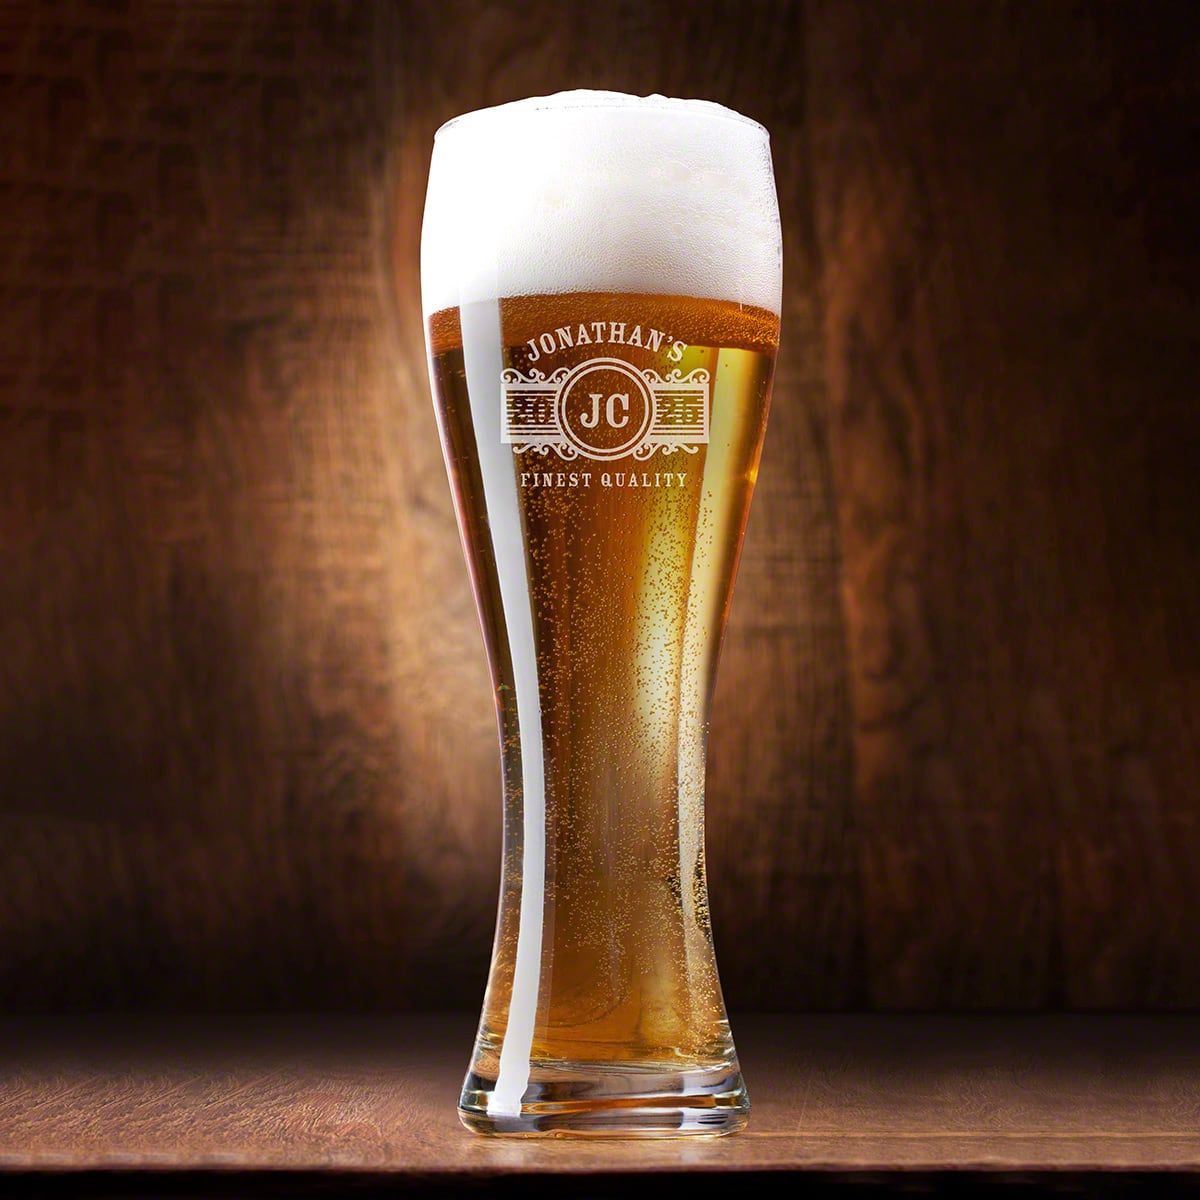 https://images.homewetbar.com/media/catalog/product/e/n/engraved-tall-pilsner-beer-glass-marquee-p-10727.jpg?store=default&image-type=image